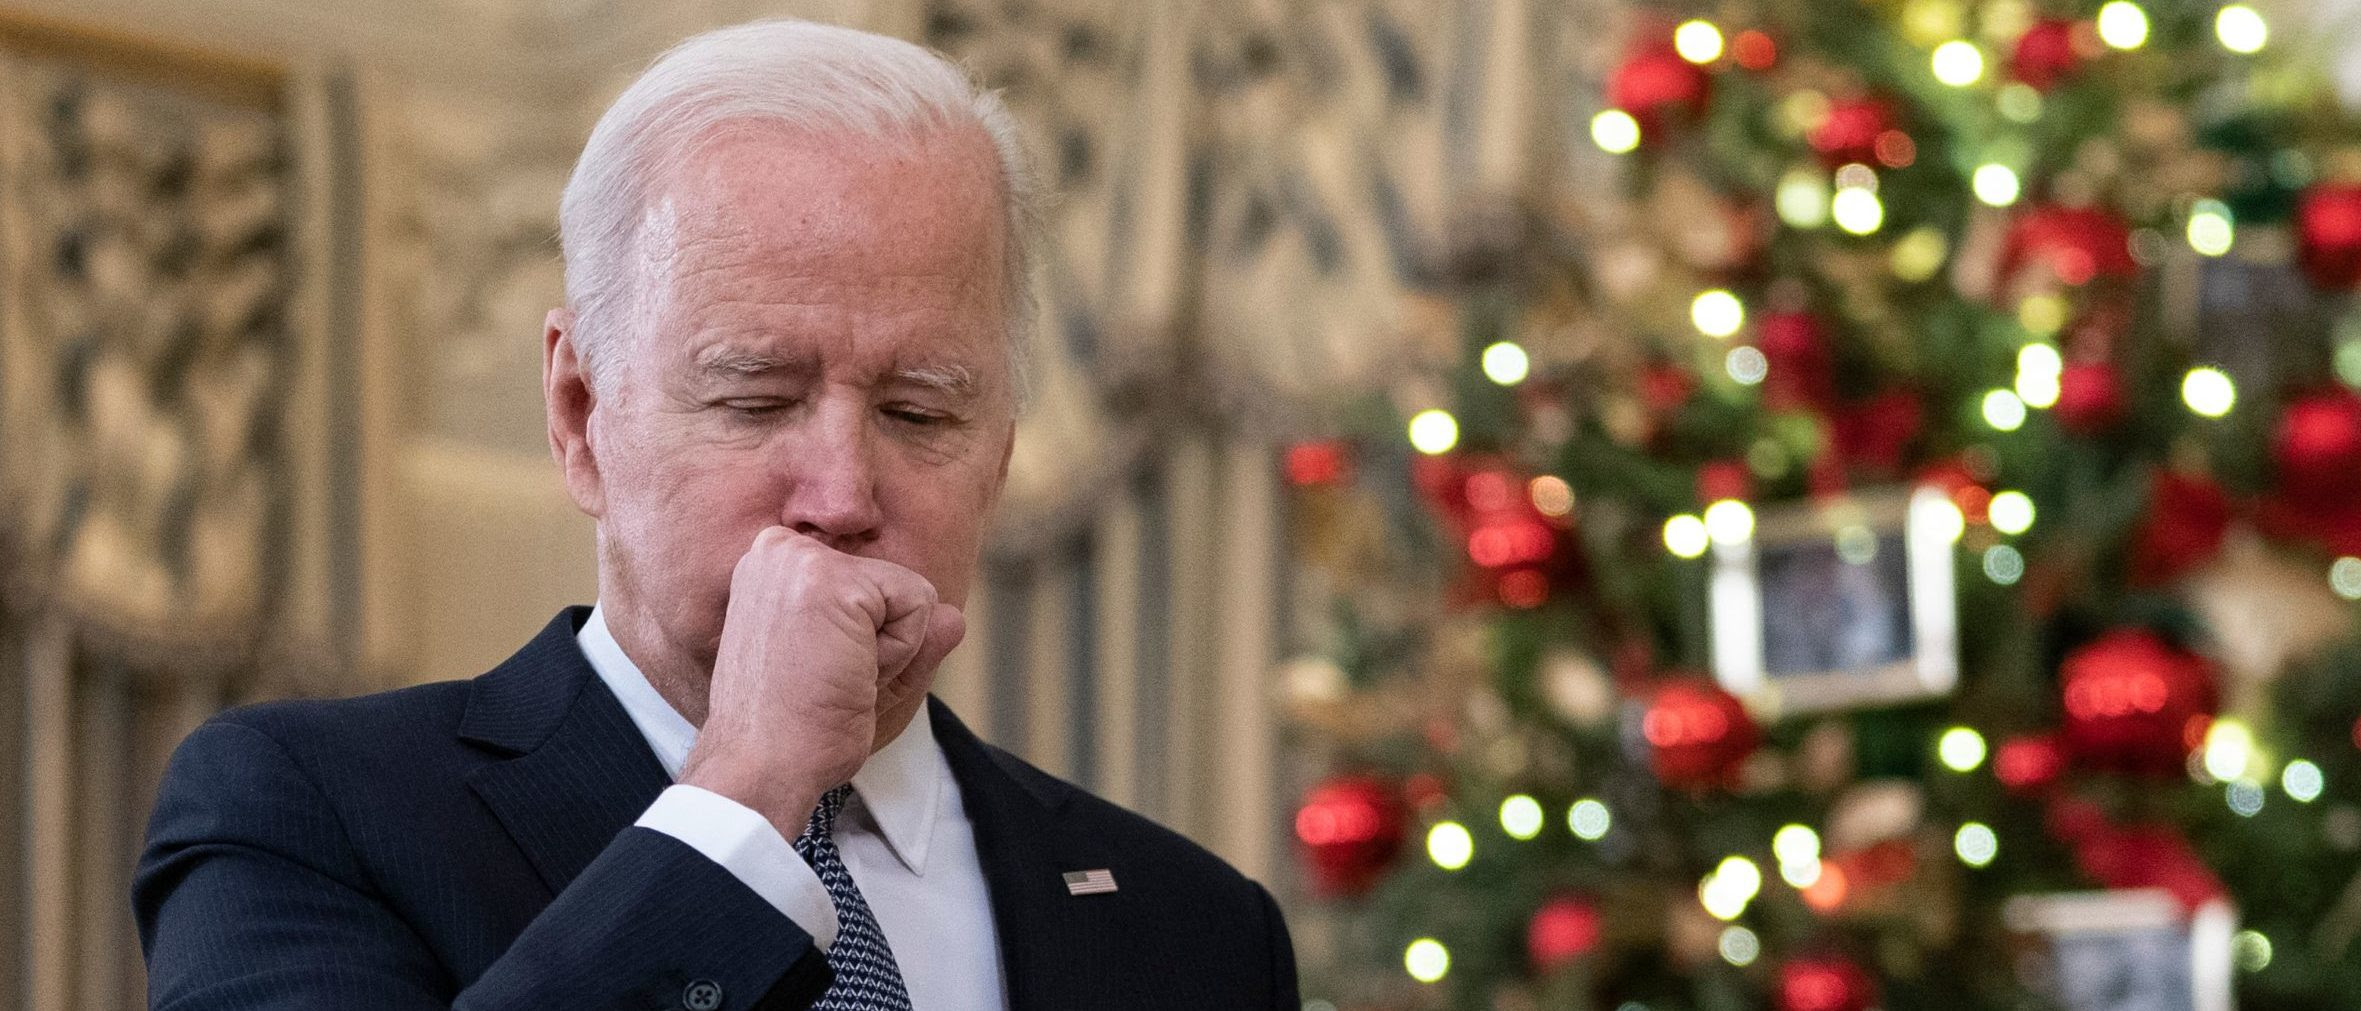 EXCLUSIVE POLL: Biden Is ‘Not Concerned’ About Harms Of High Inflation, Majority Of Americans Say